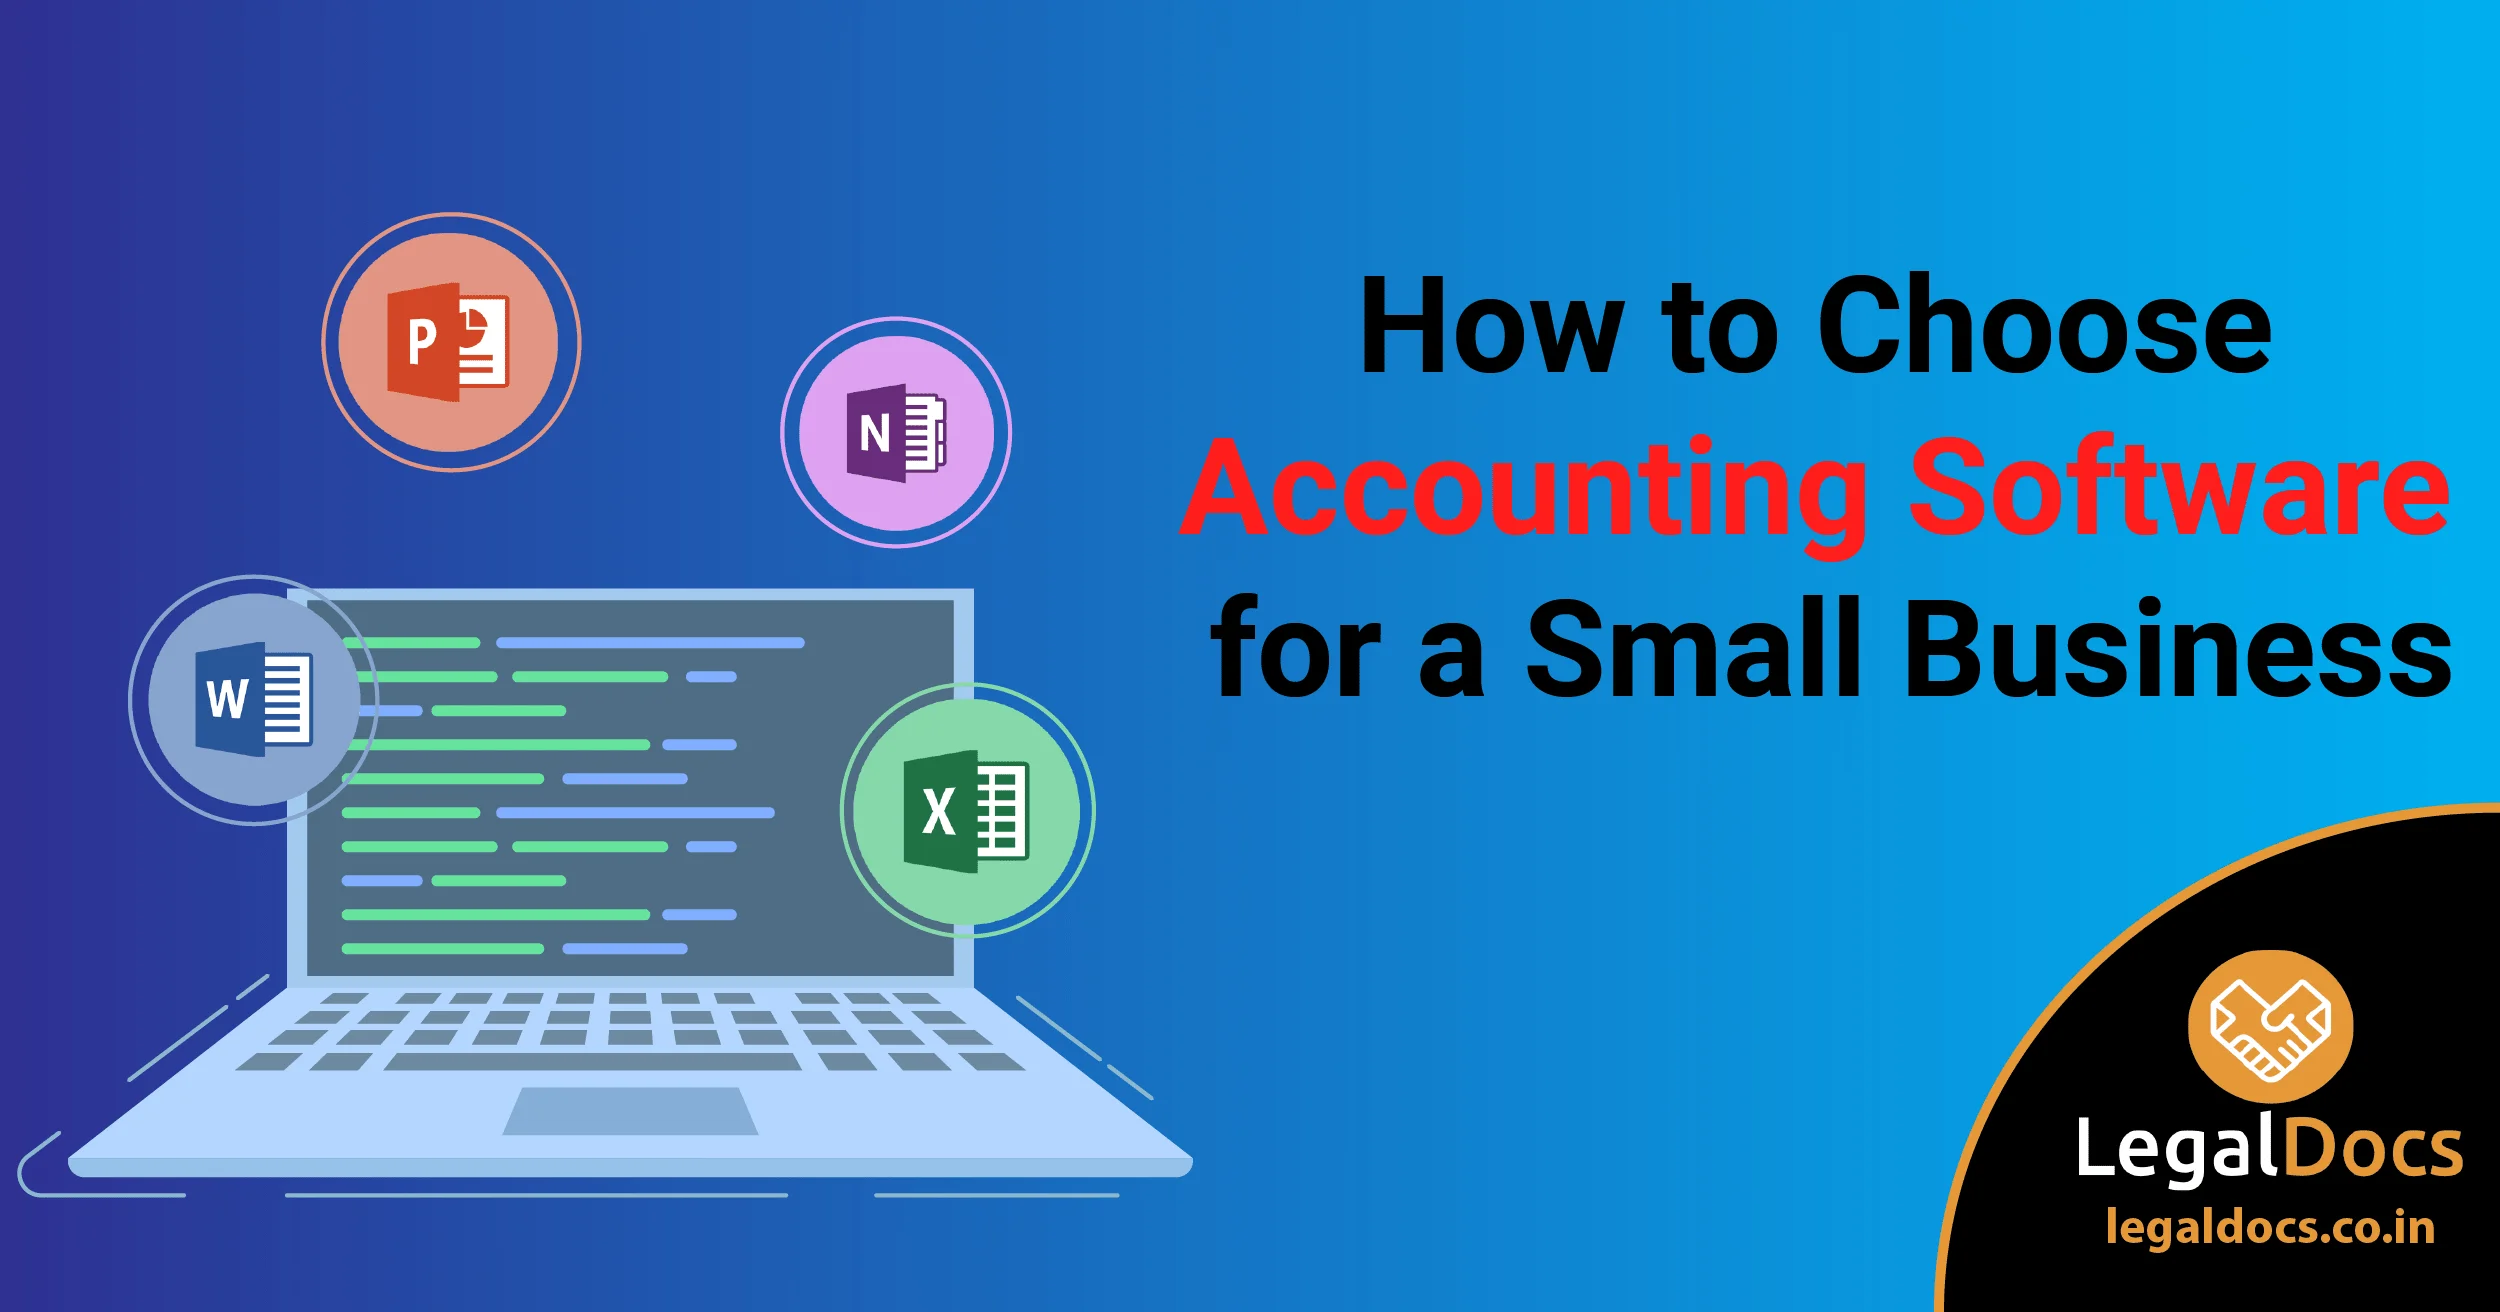 How to Choose Accounting Software for a Small Business? - LegalDocs